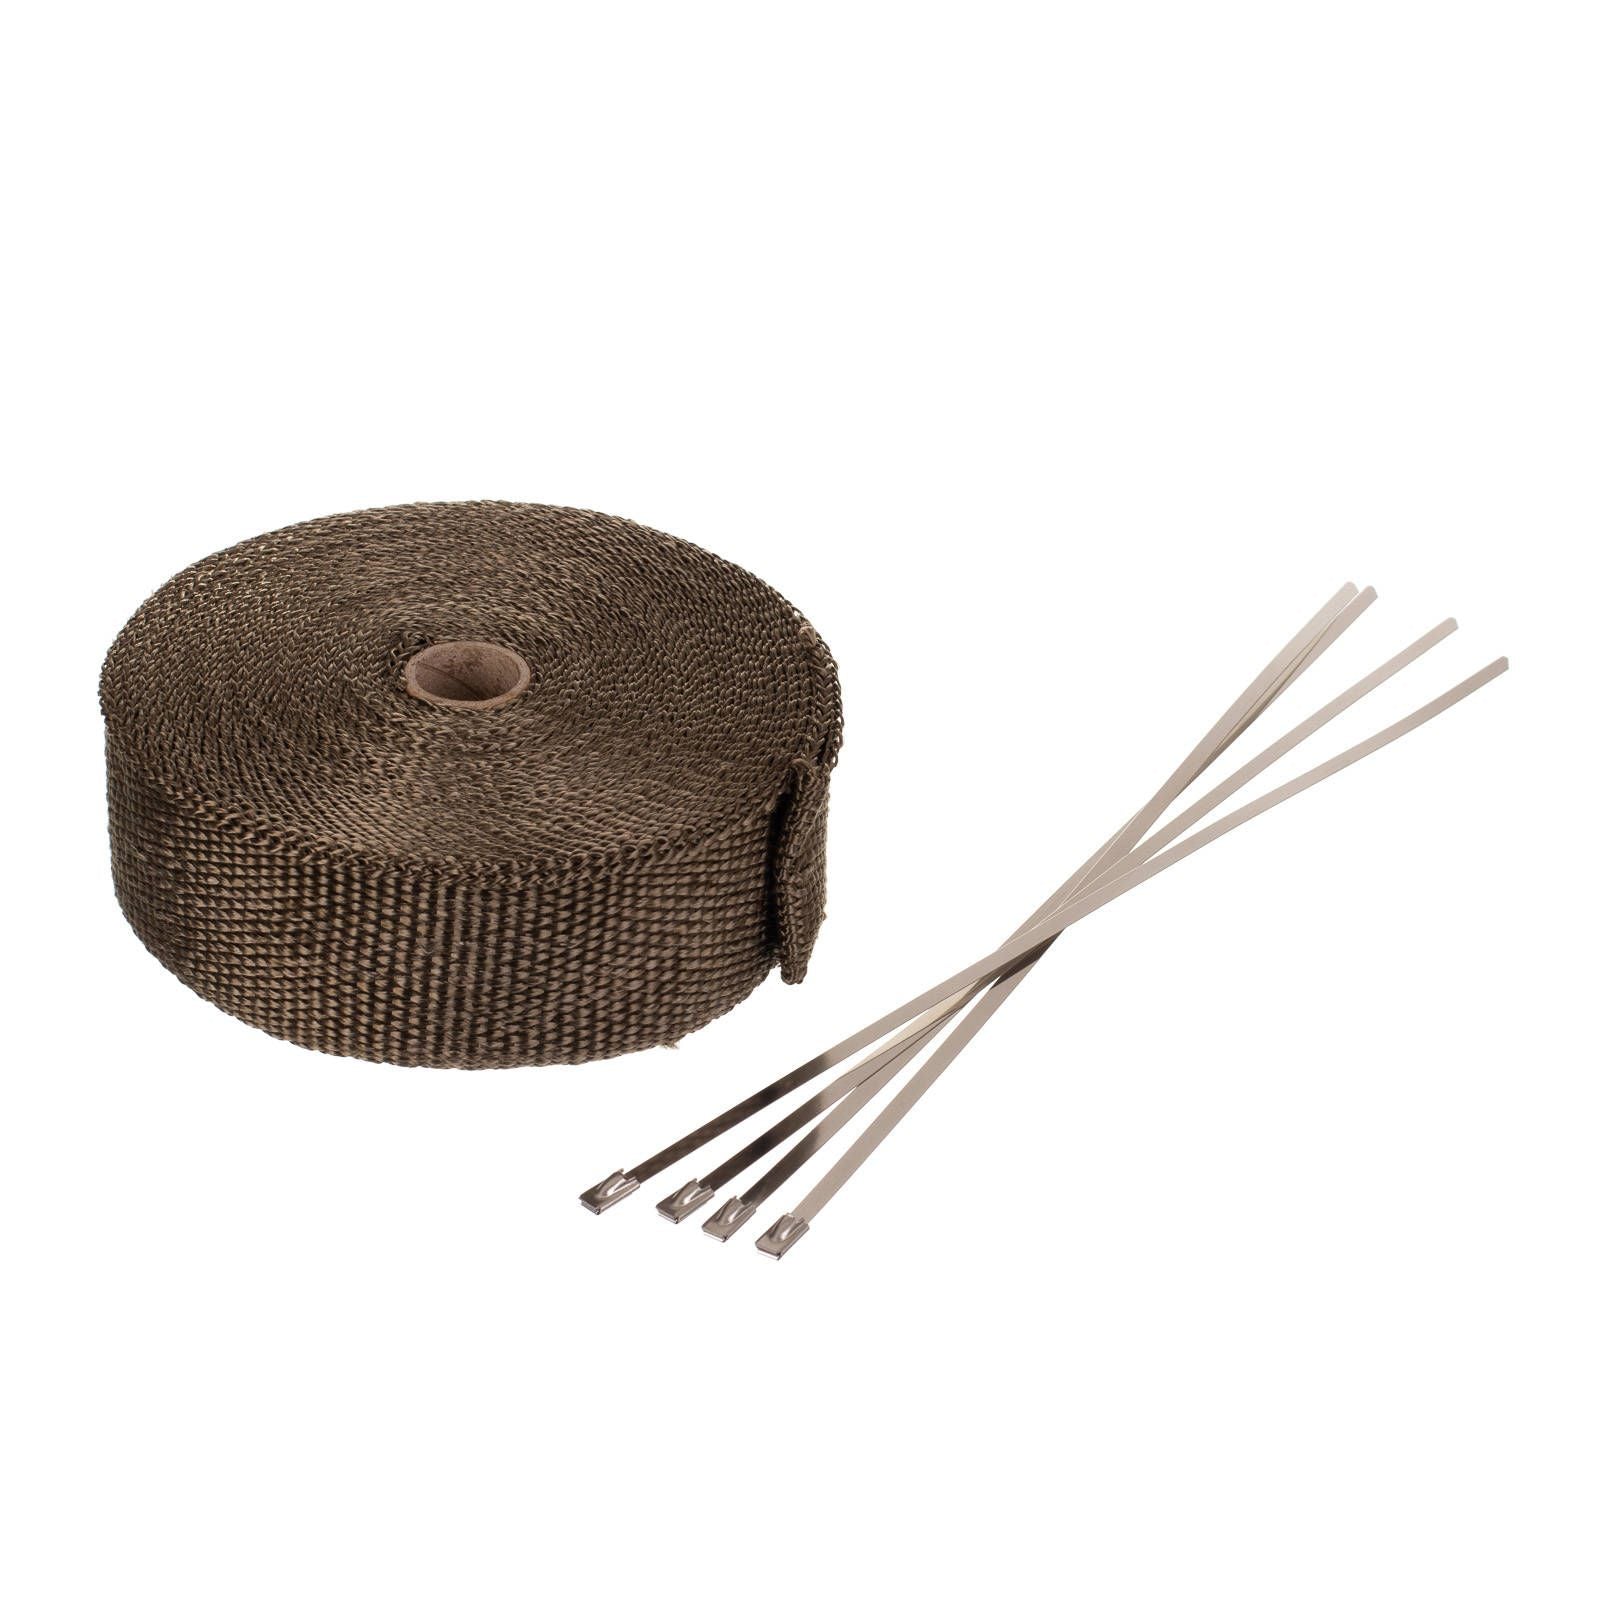 New WHITES Exhaust Wrap Gold 50mm (15M Roll) - With 4 S/S Ties #WPEXWG15